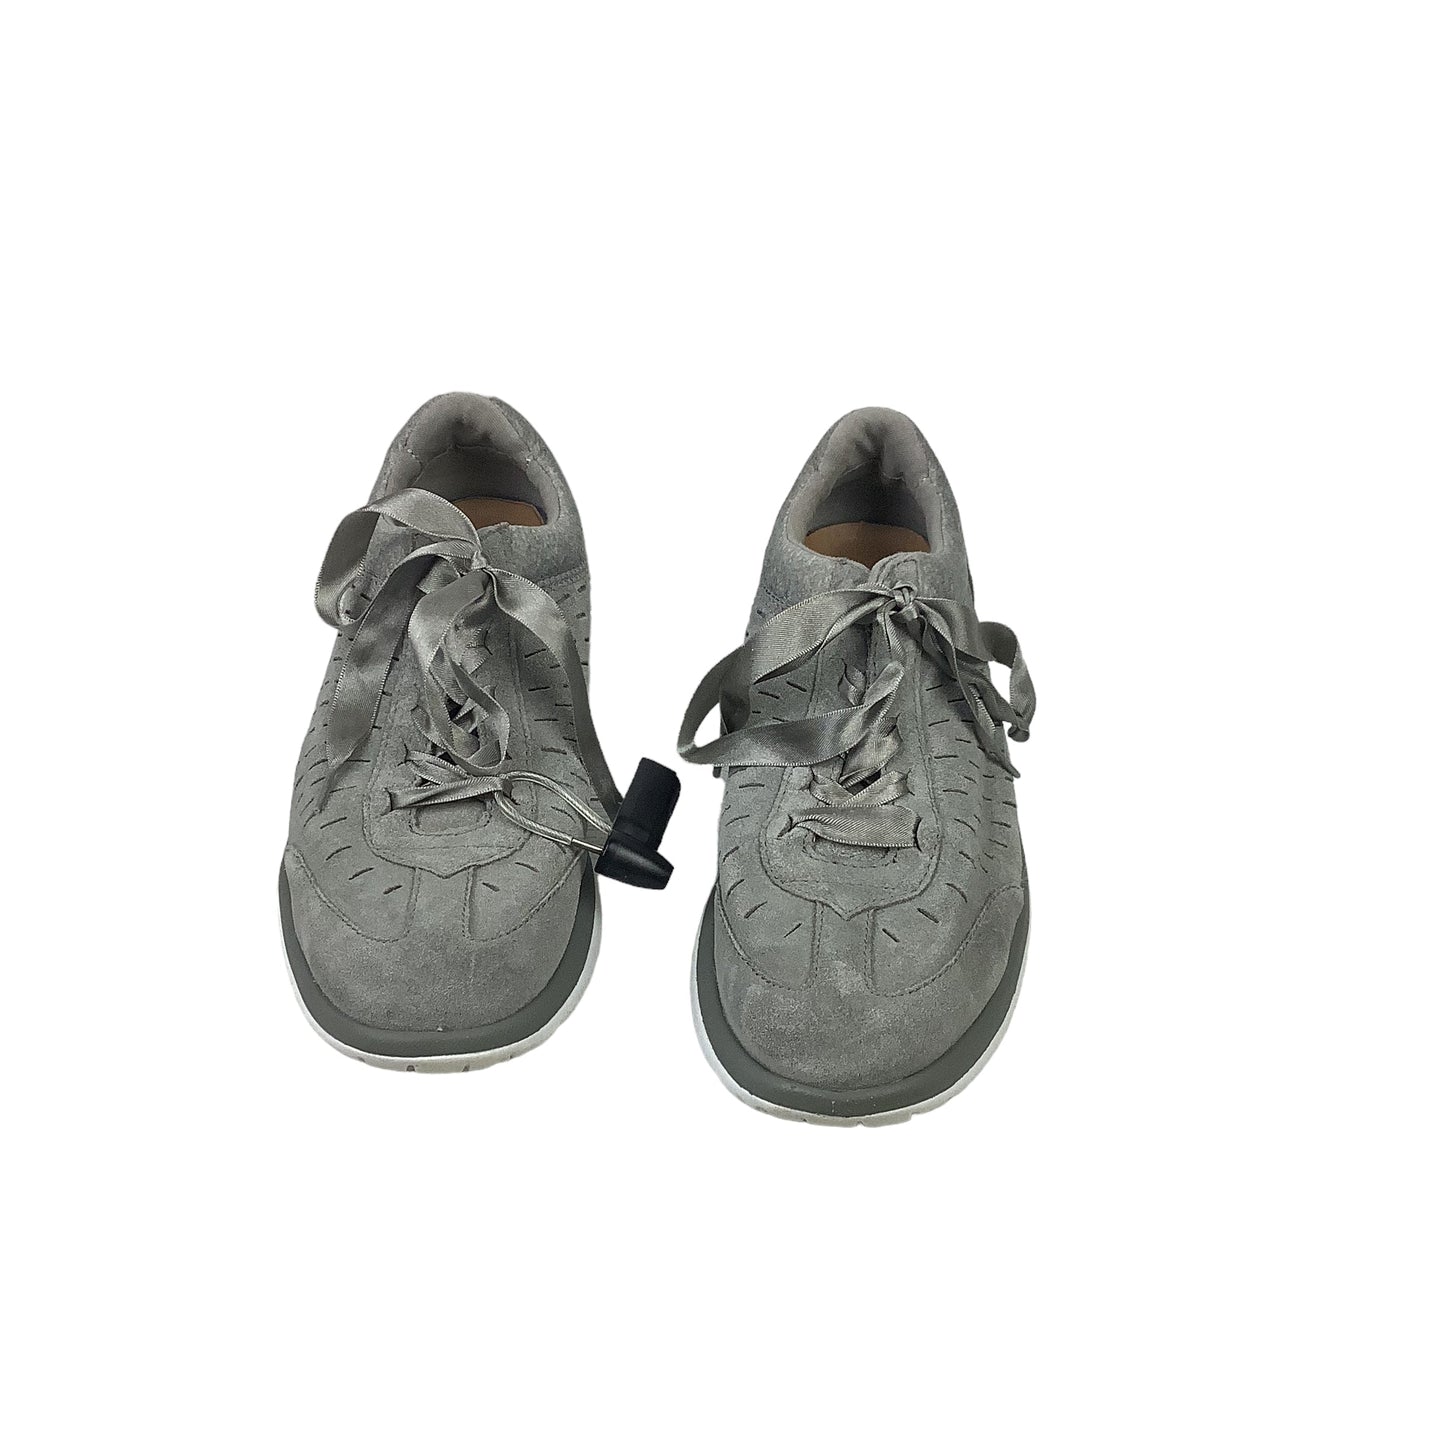 Shoes Sneakers By Ugg  Size: 6.5